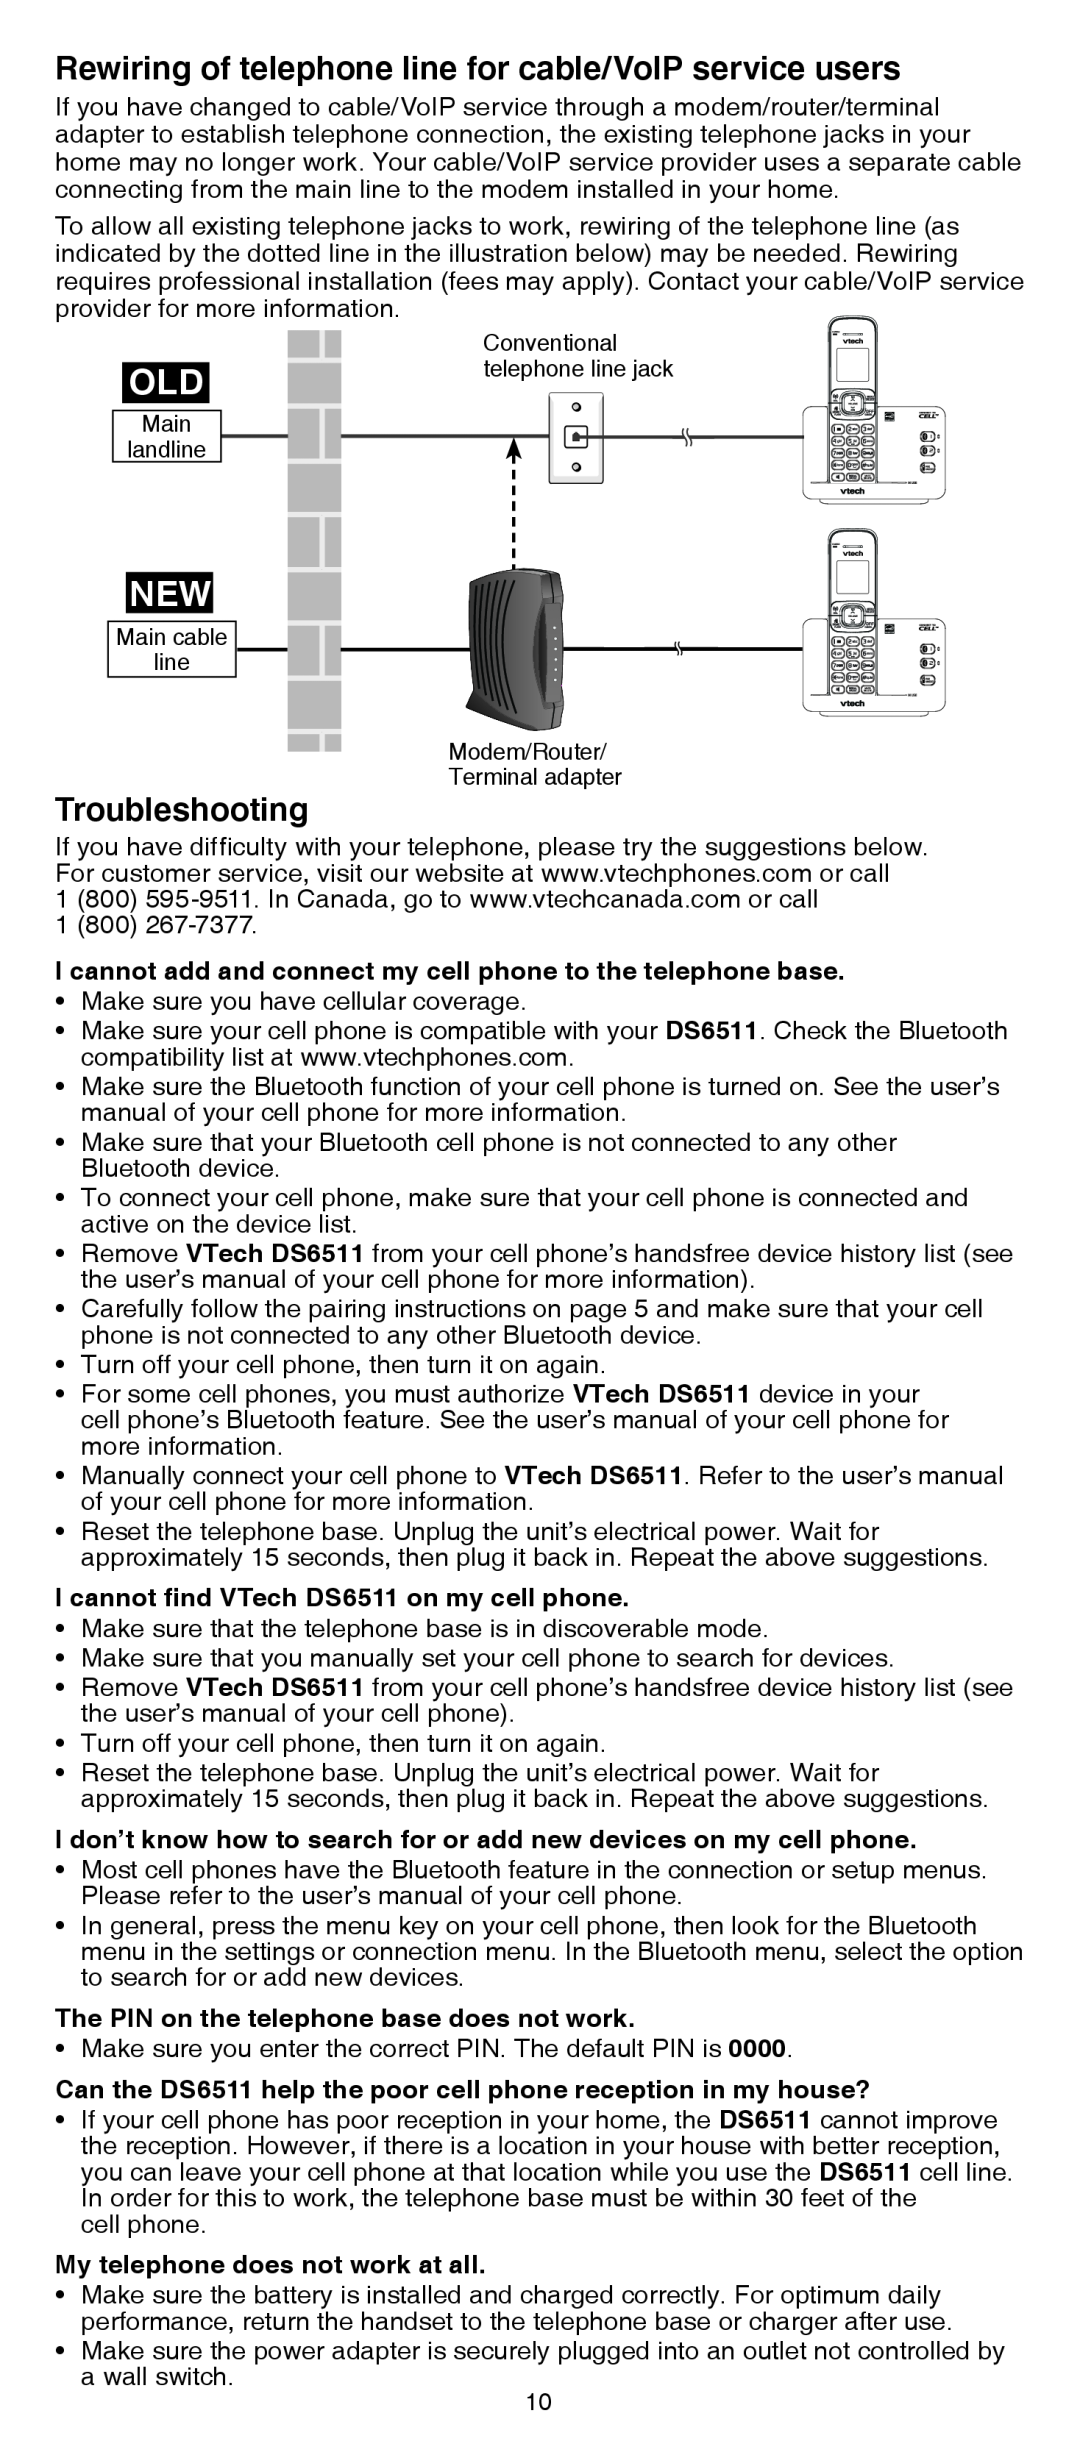 VTech DS6511-16, DS6511-2, DS6511-3, DS6511-4A Rewiring of telephone line for cable/VoIP service users, Troubleshooting 